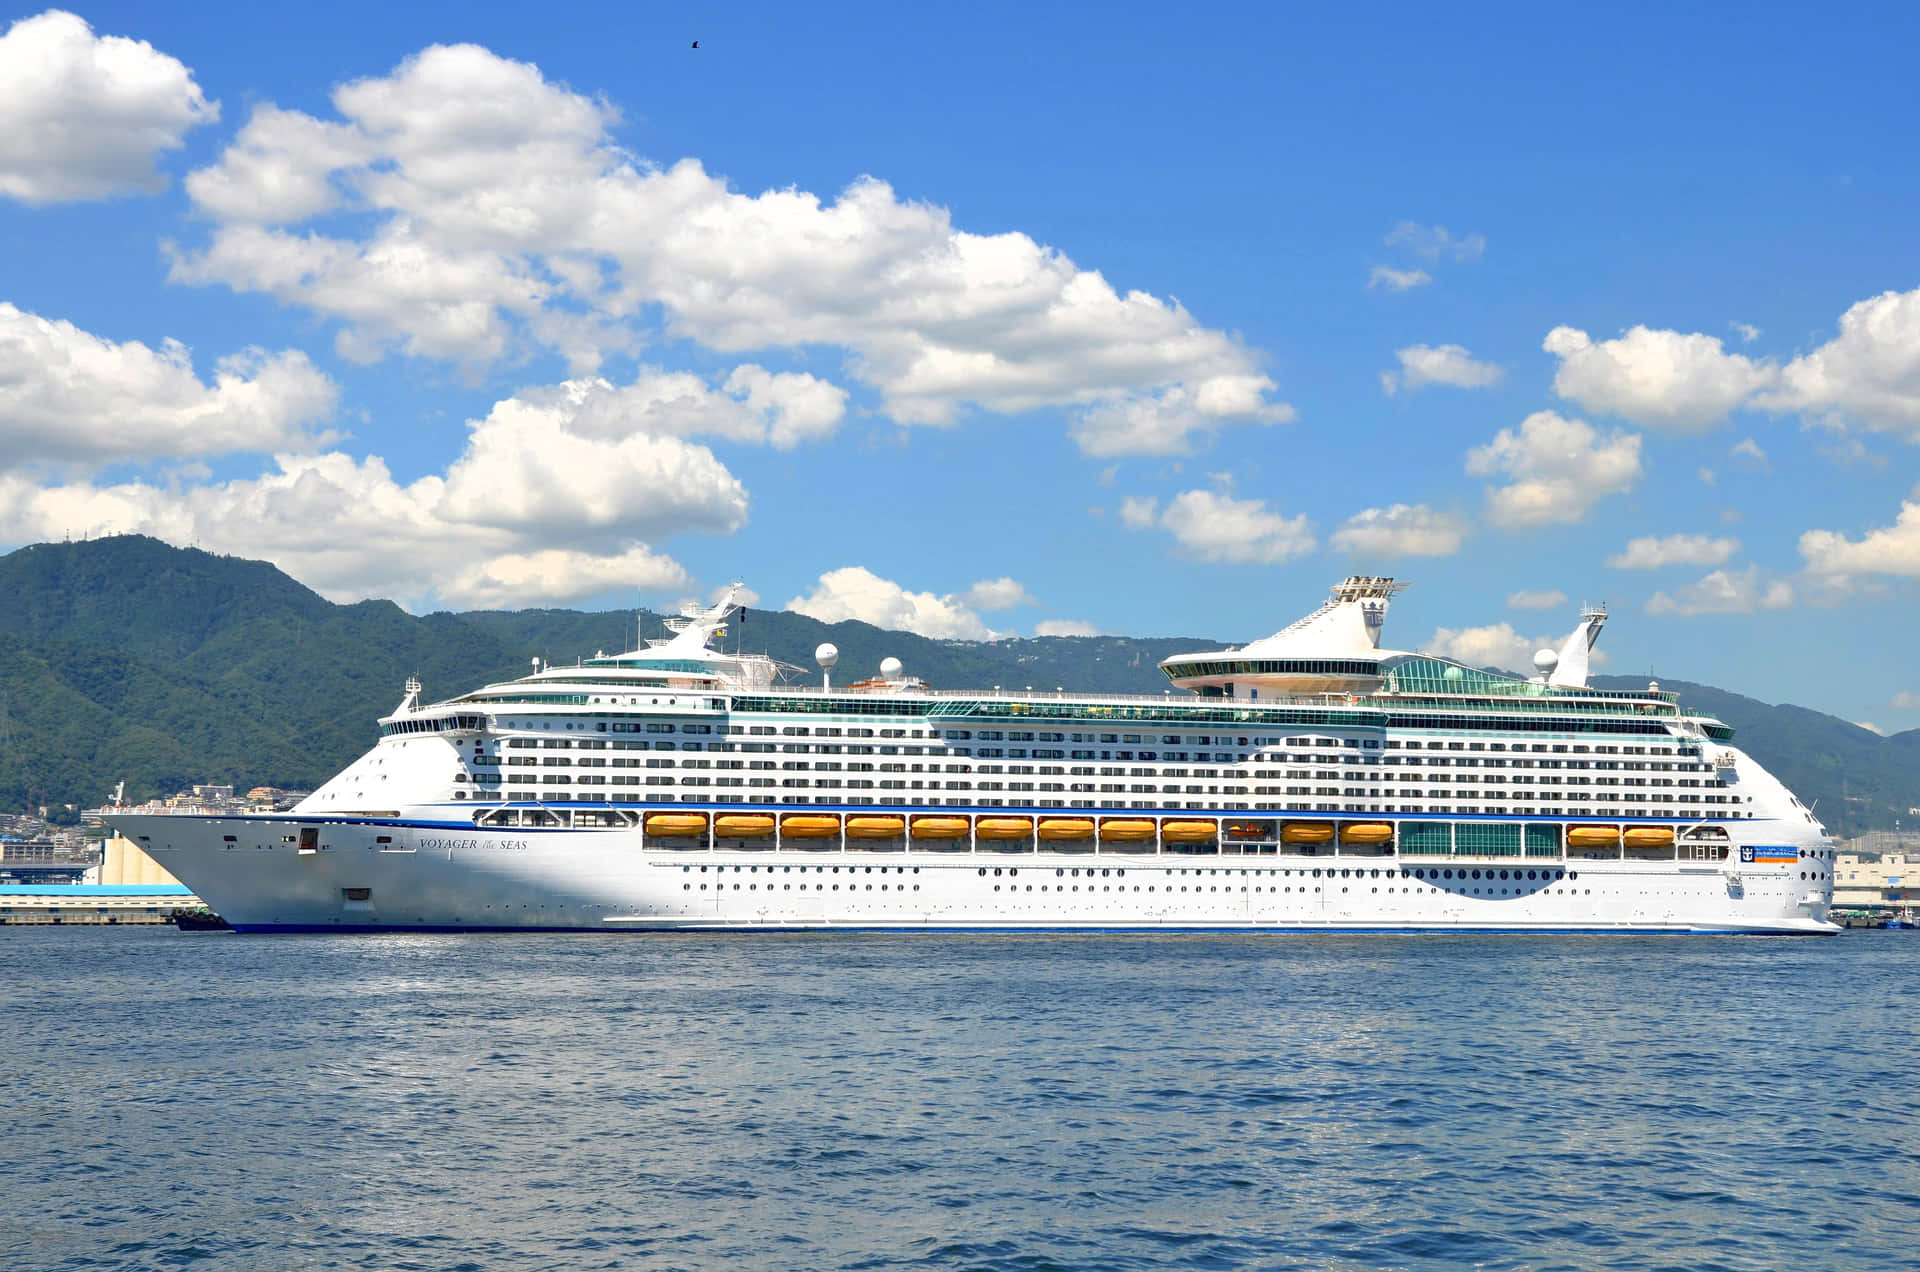 Enjoy the luxurious experience aboard a cruise ship